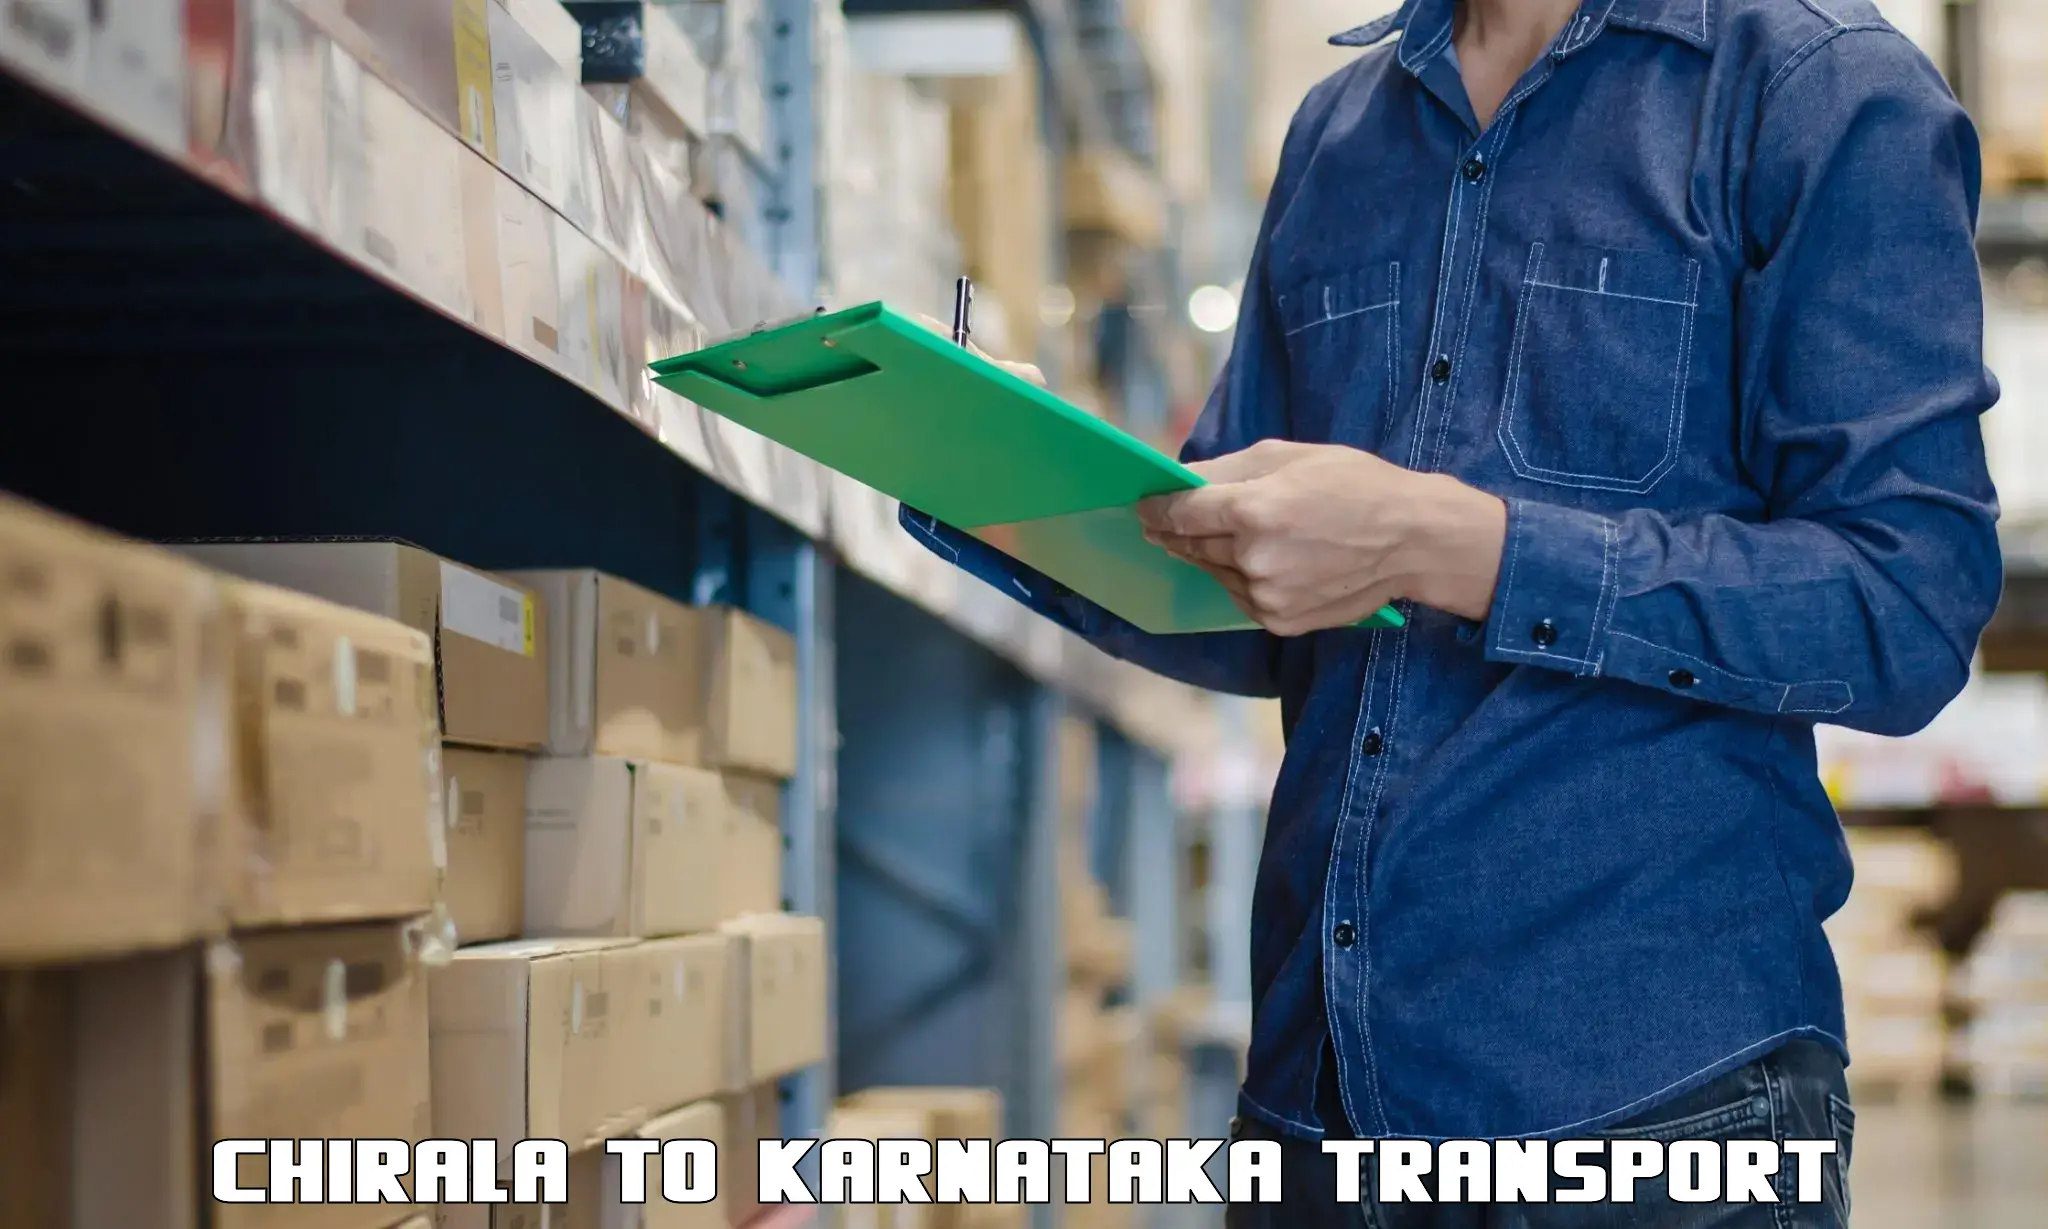 Commercial transport service Chirala to Bengaluru